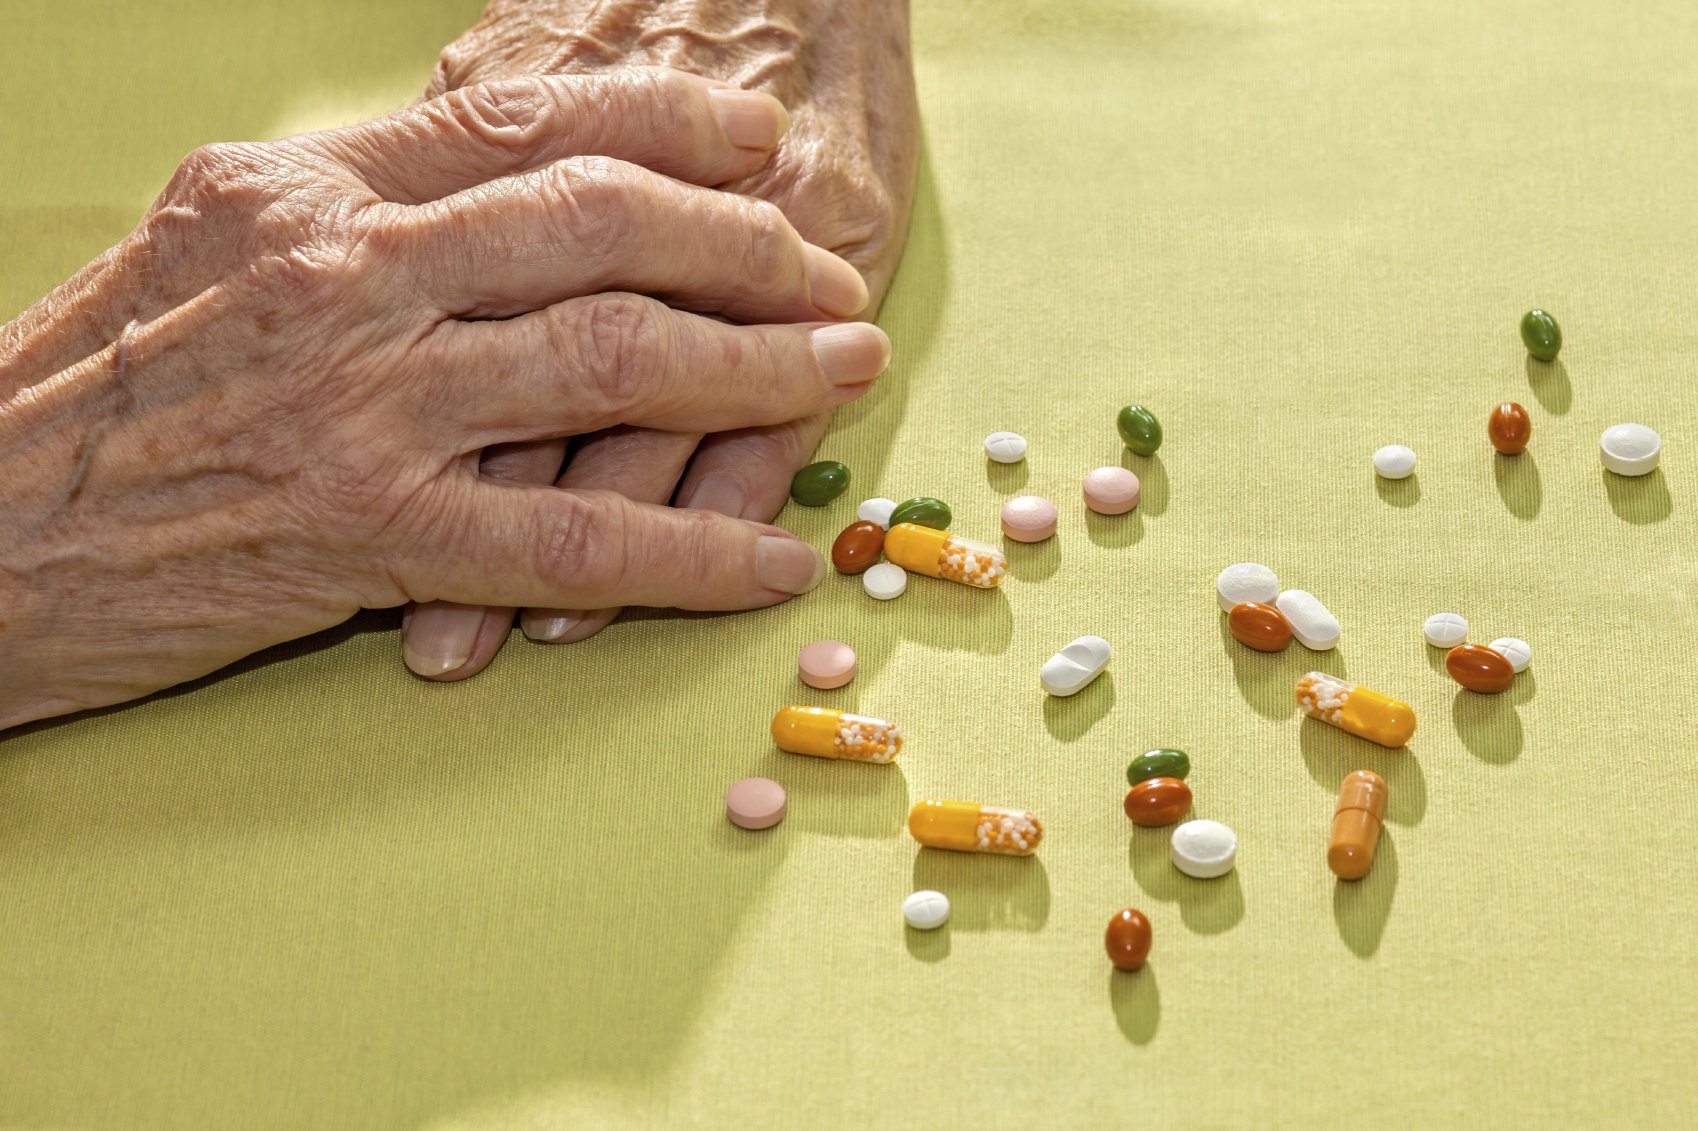 Biologic drugs for rheumatoid arthritis: the rewards may come with risks